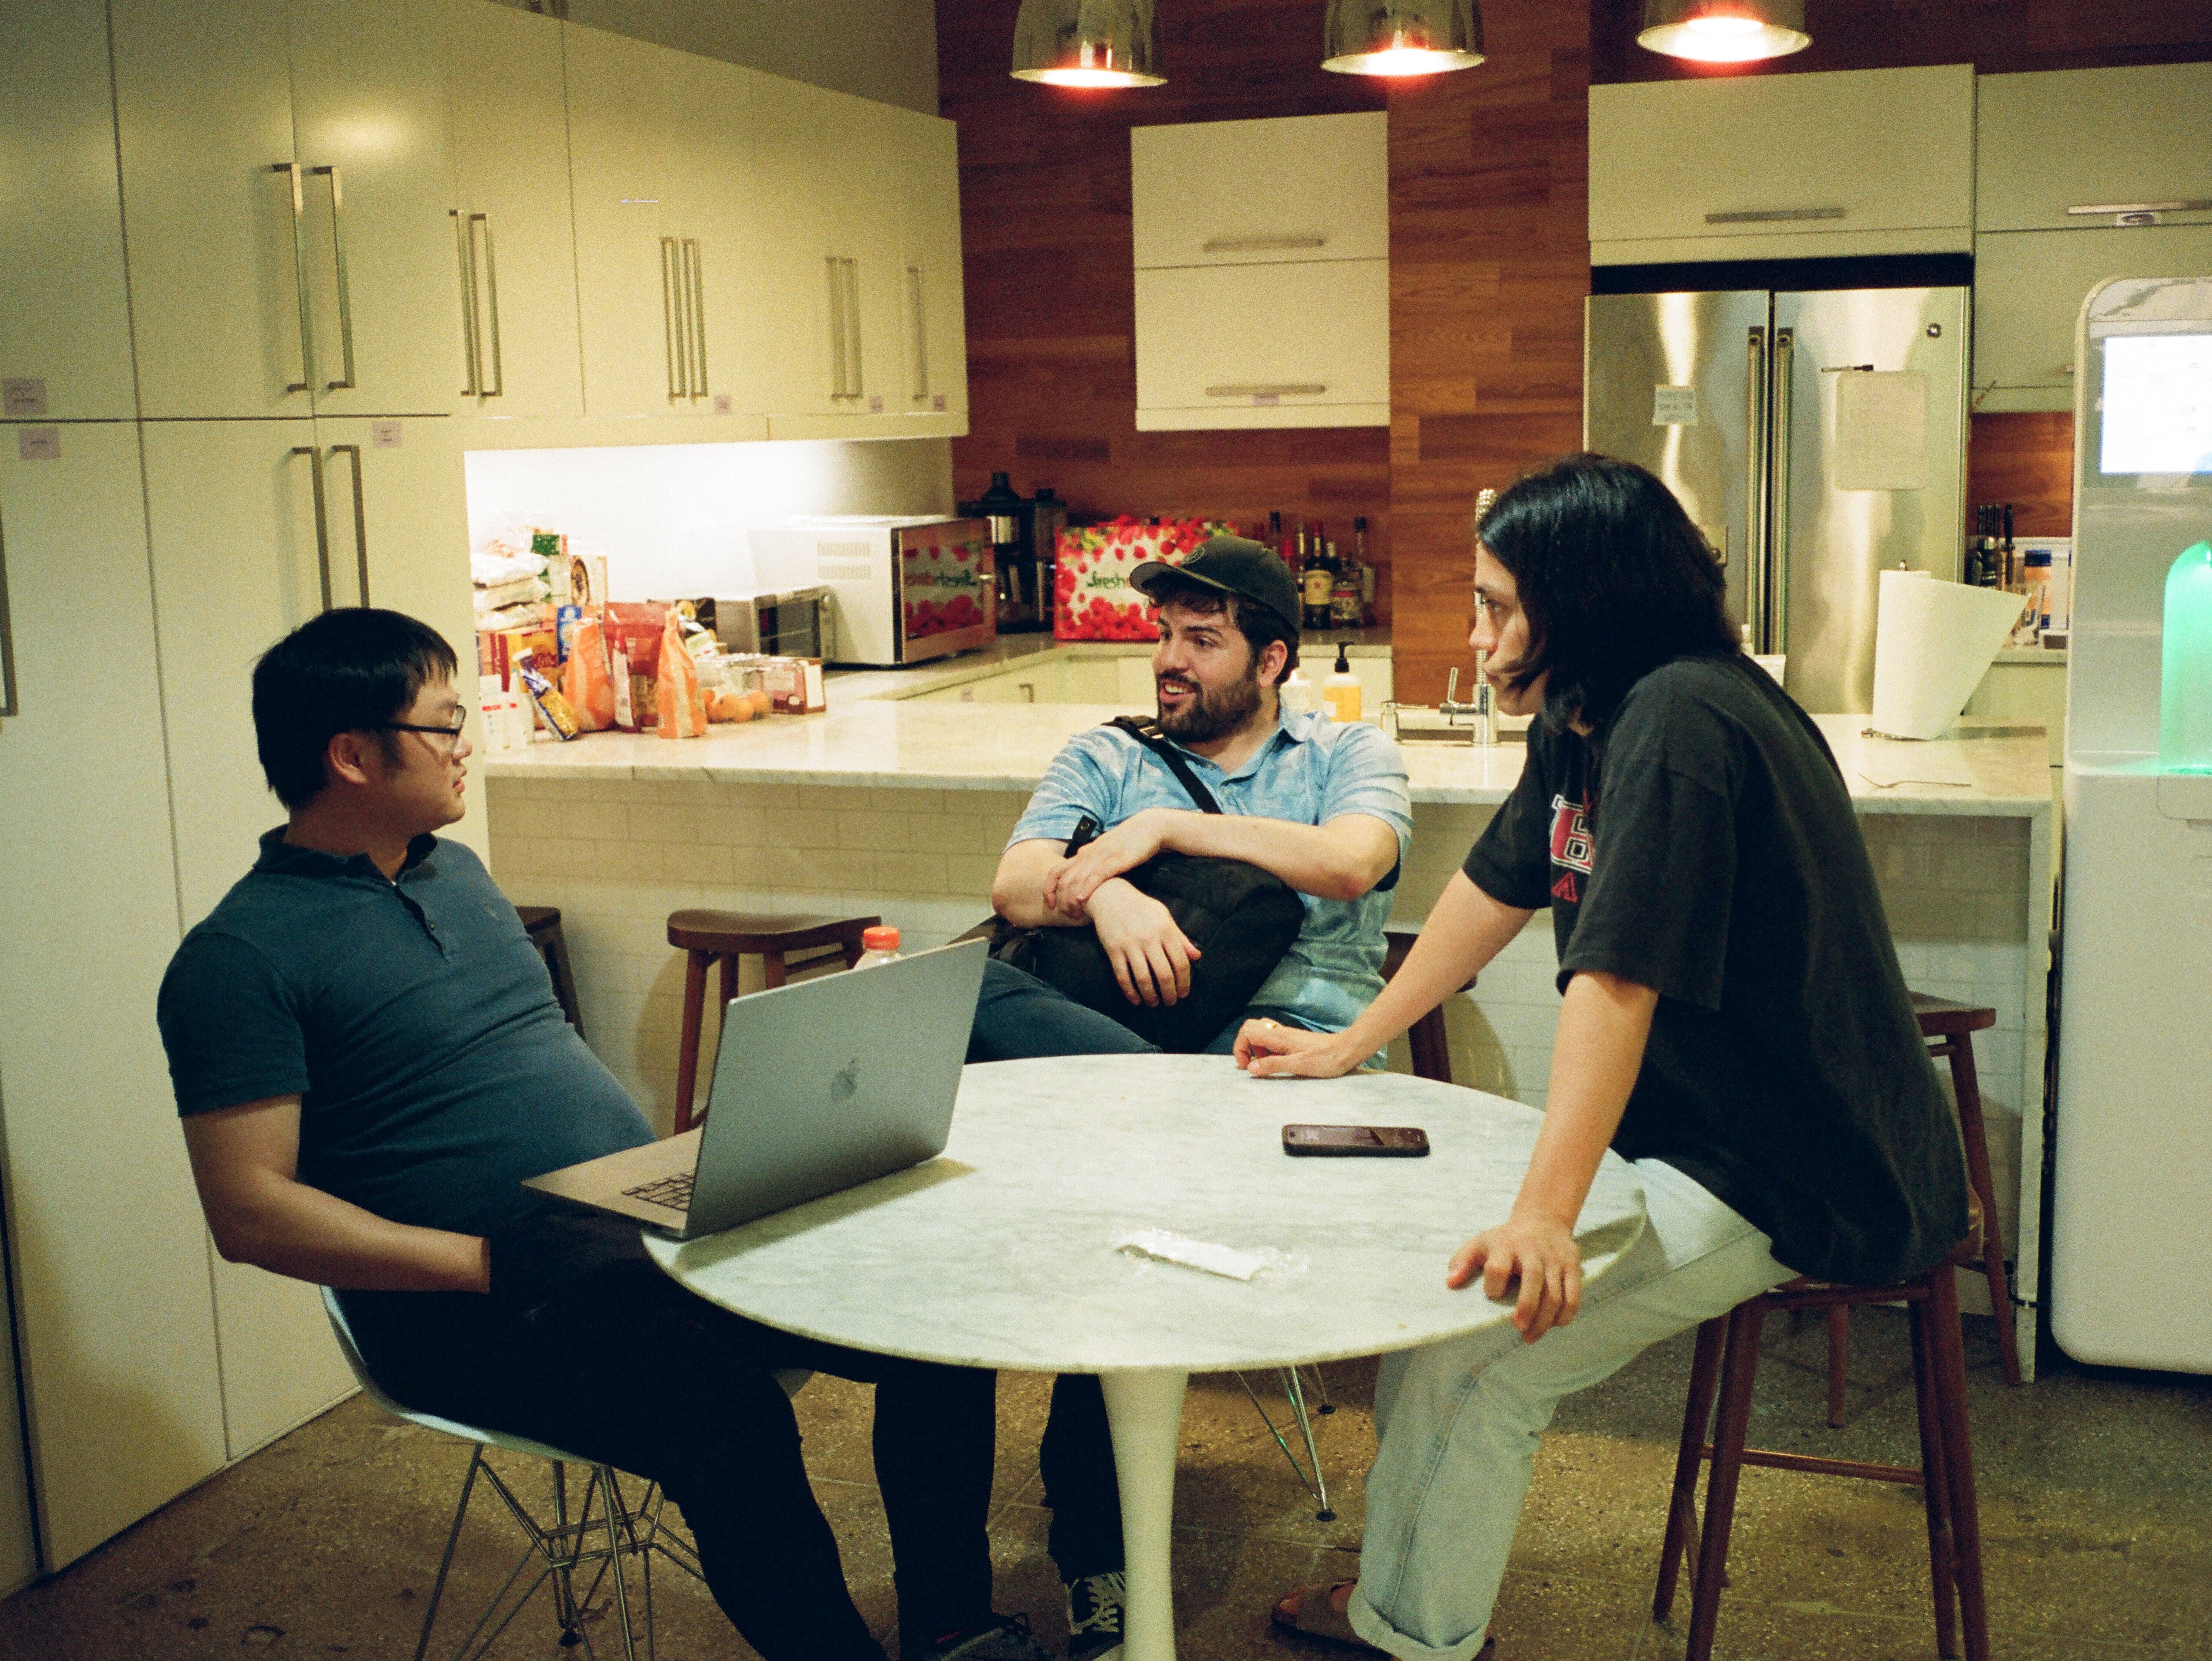 Pinwheel team members chatting at a table in the office kitchen